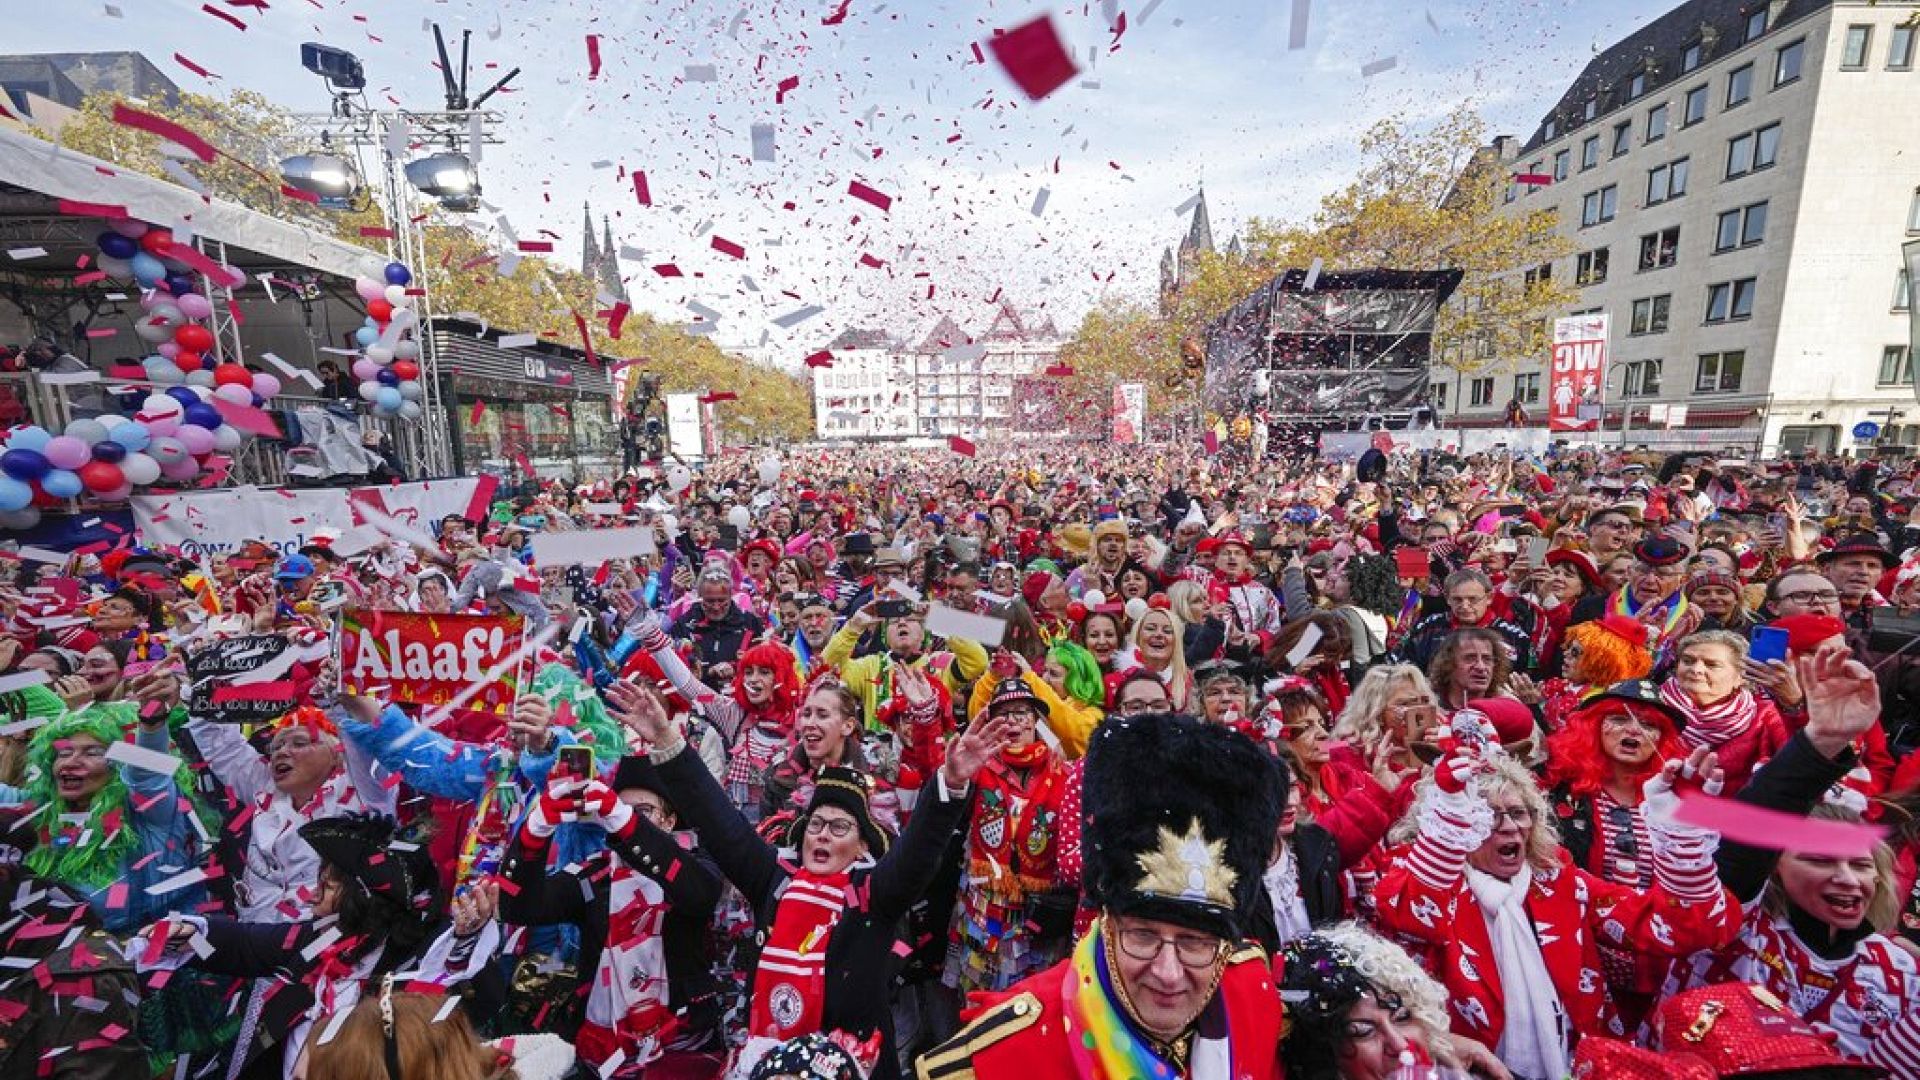 Cologne commemorates 200 years of carnival with thousands of revellers